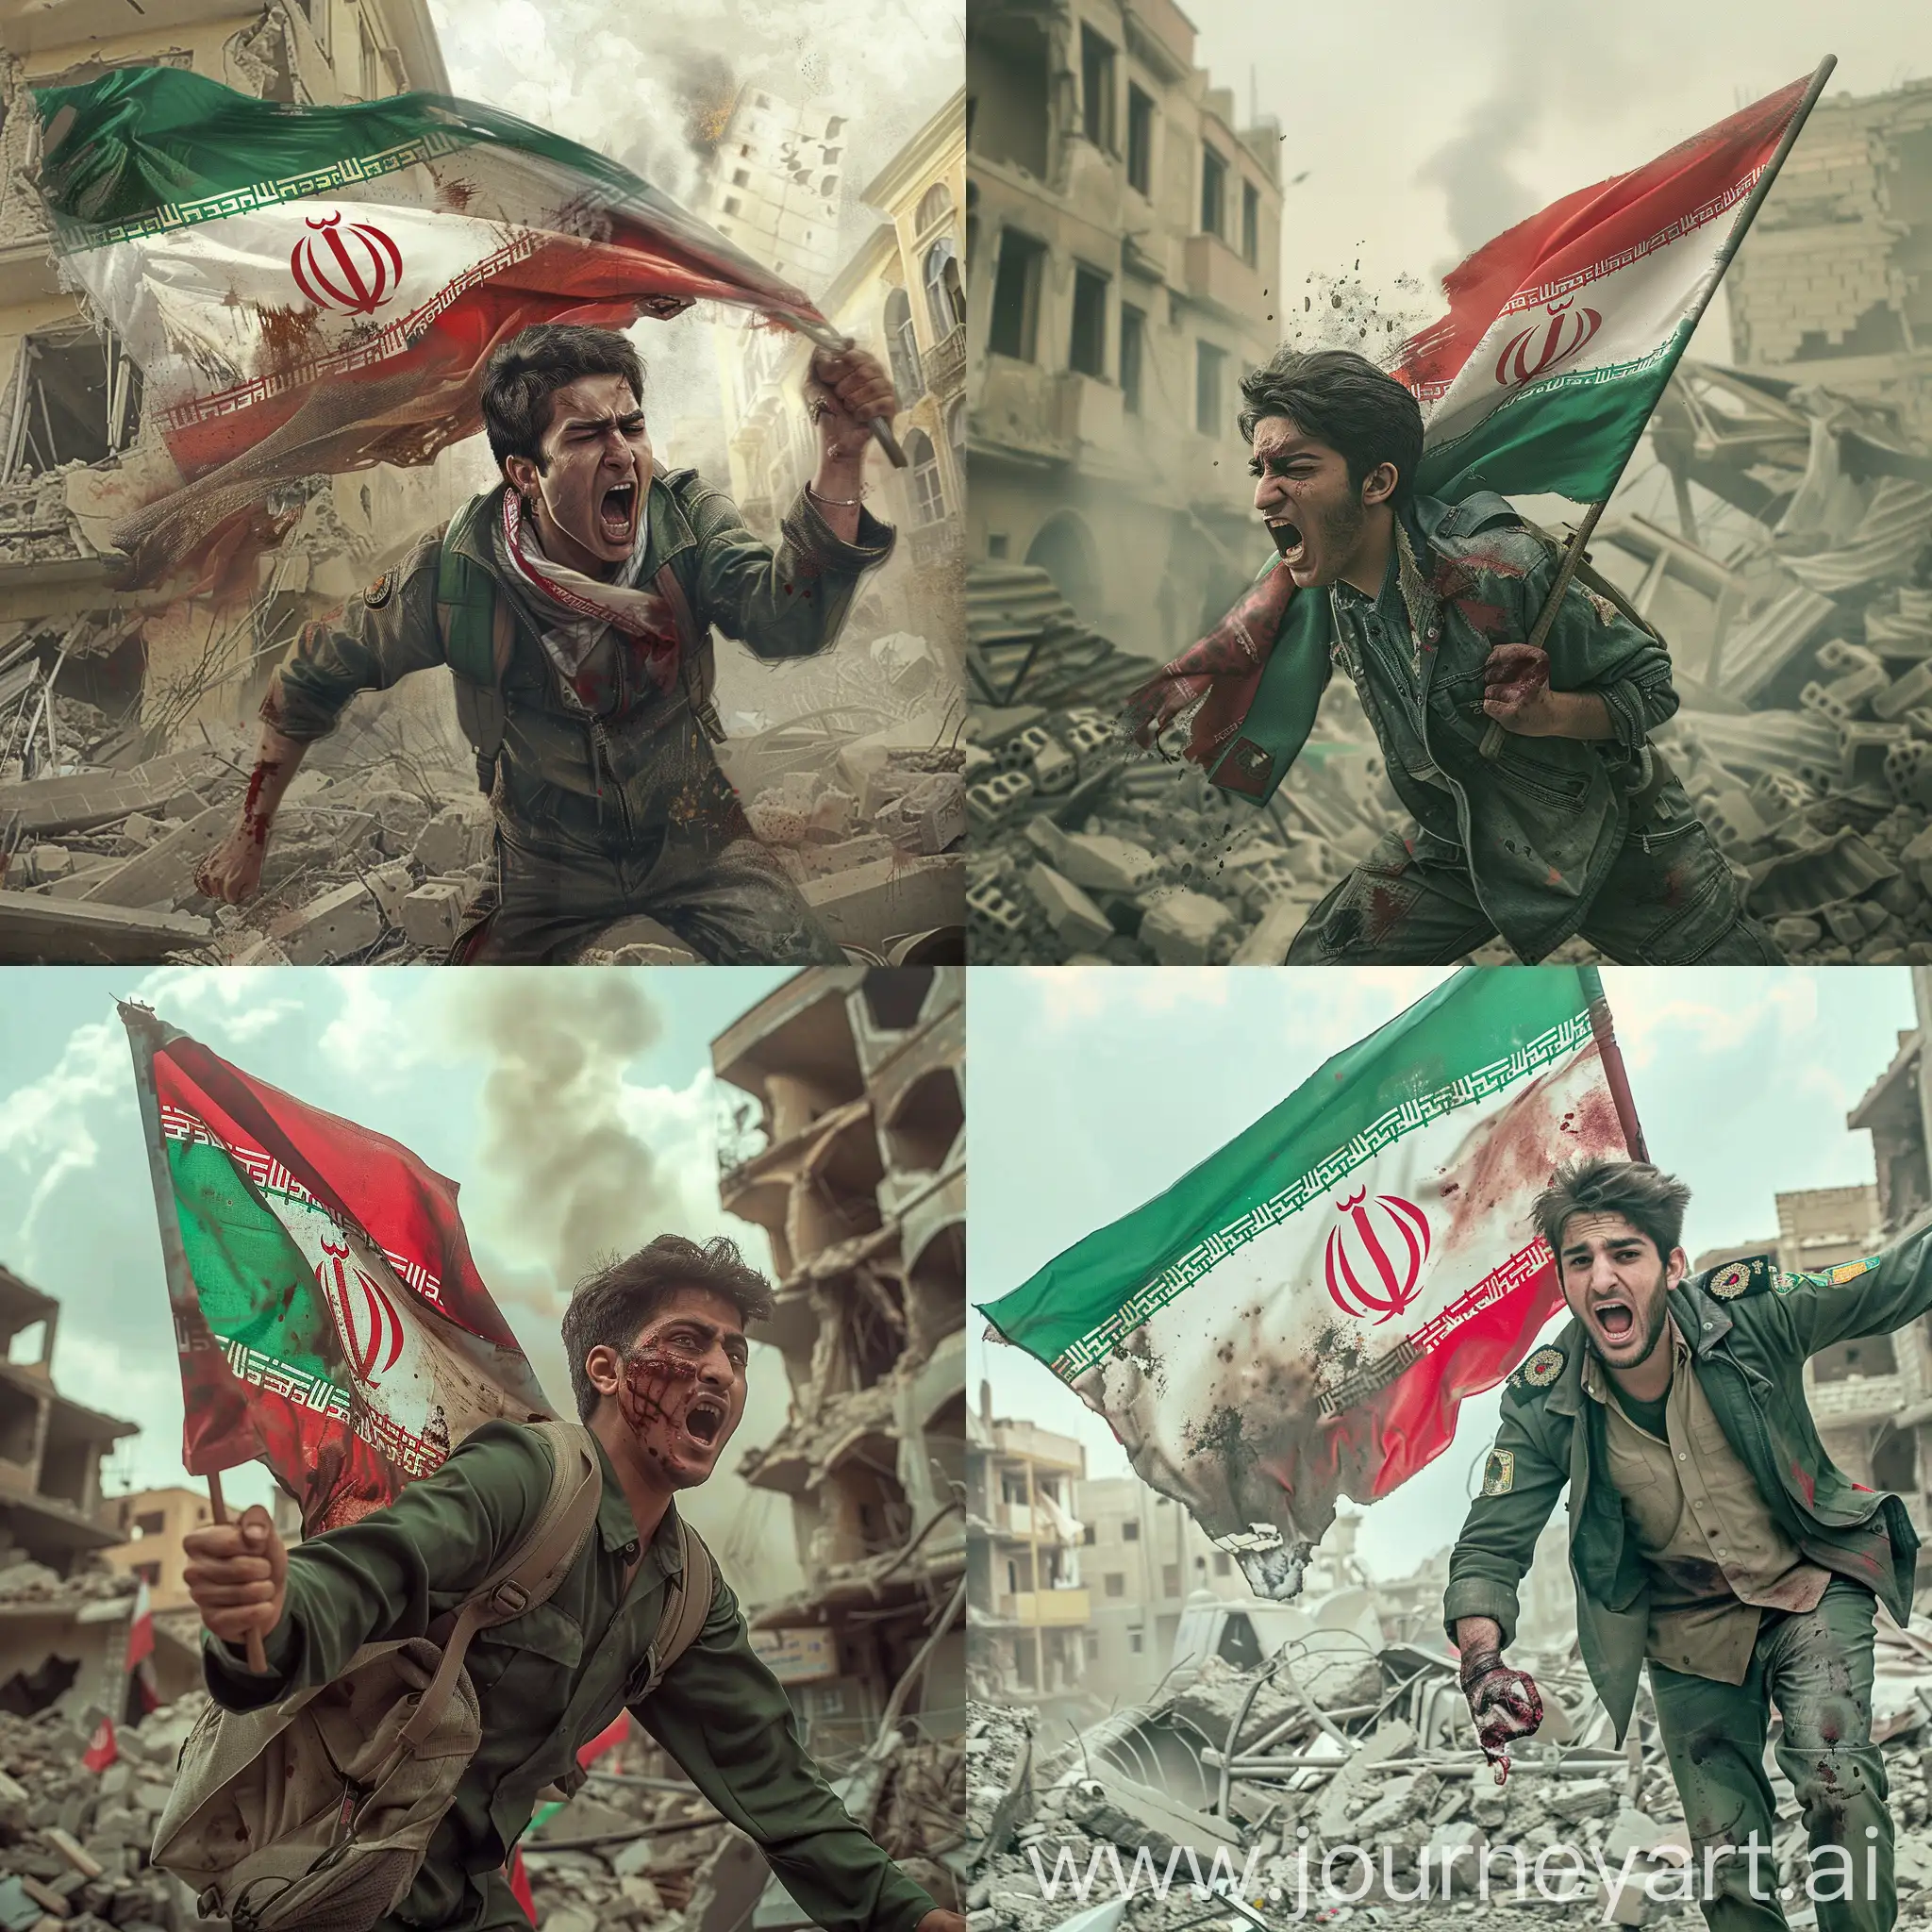 Make me an epic picture with details I say: put a young Iranian man in the middle of a ruined city, holding the flag of the Islamic Republic of Iran and screaming while wounded and bruised.